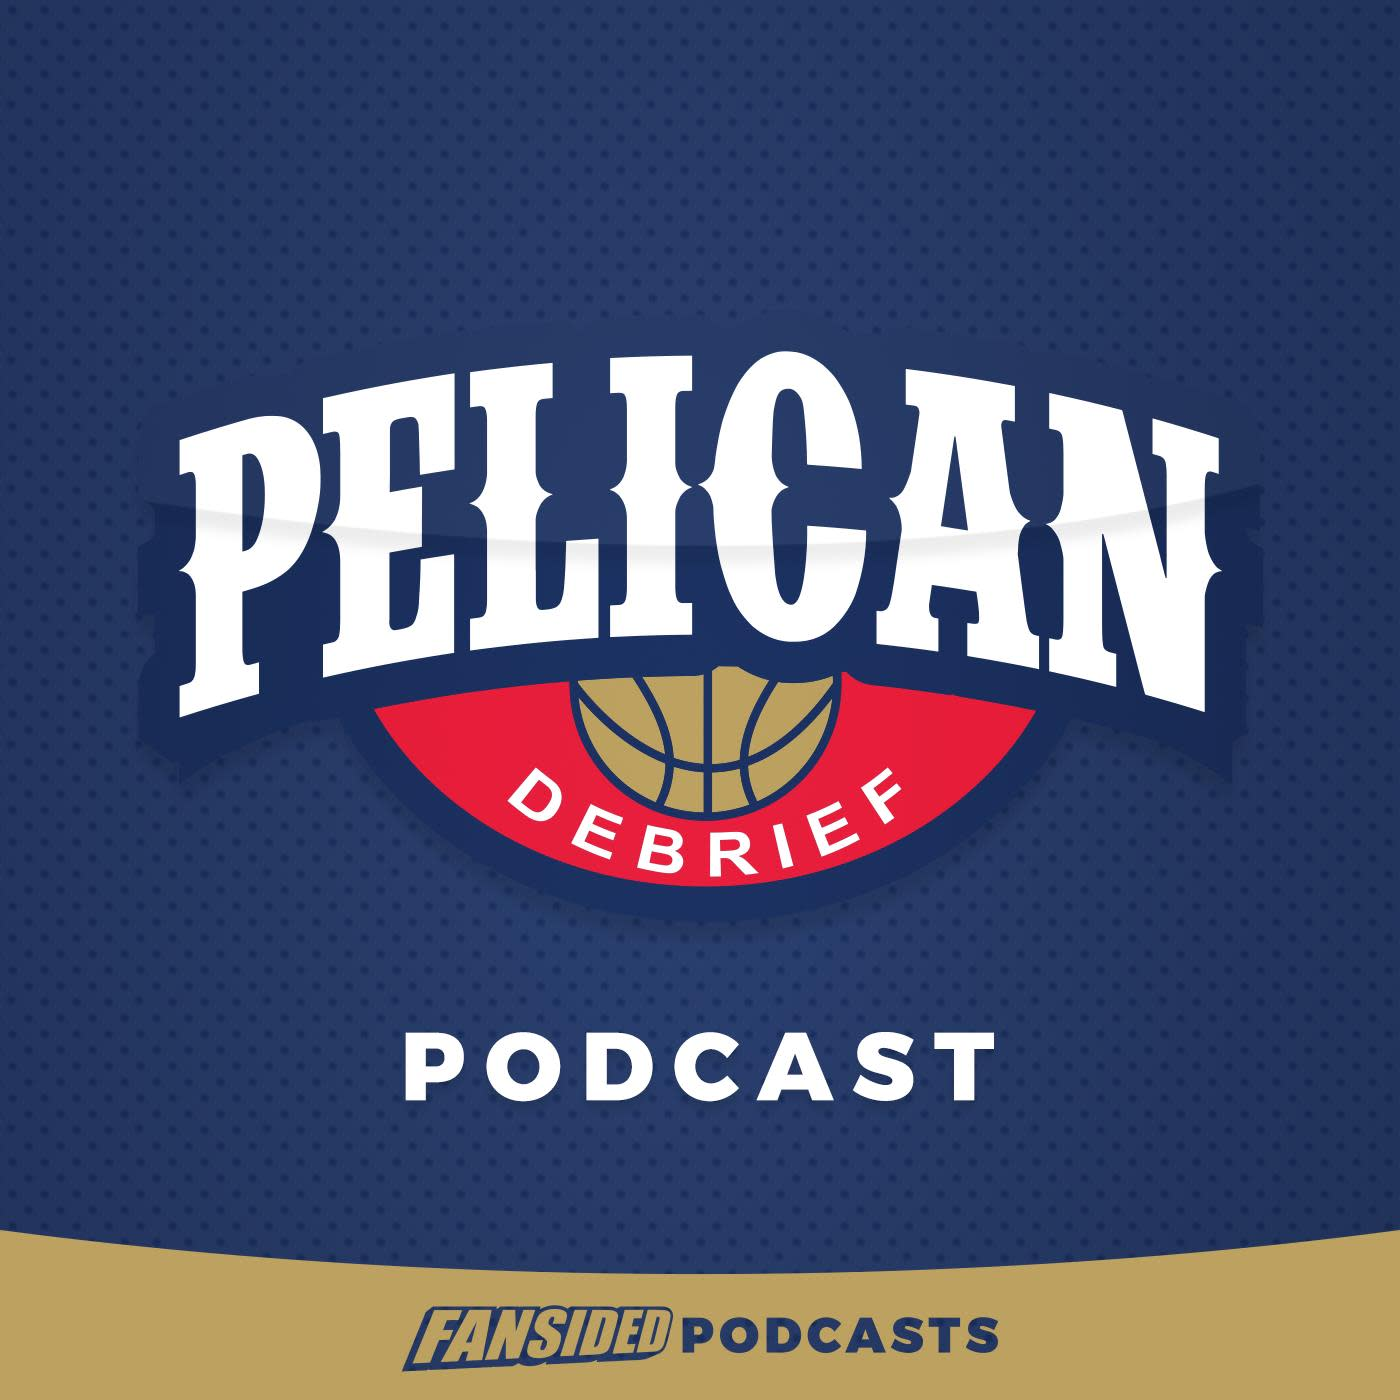 10 Questions with Chris Conner of Pelican Debrief